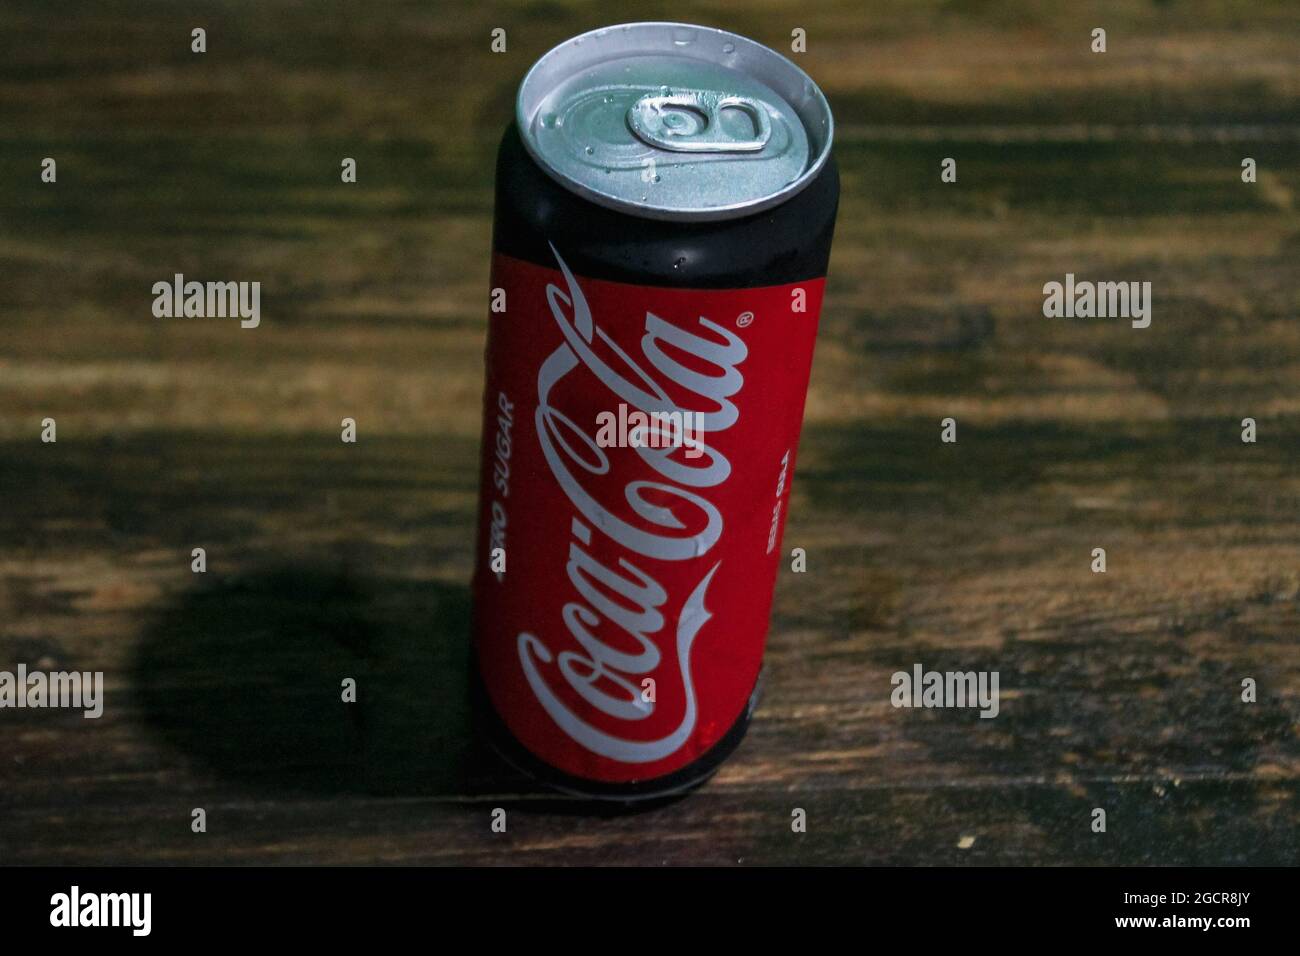 Lampung, Indonesia - august 4, 2021 : Cold coca cola can drink on a brown wooden background. Stock Photo